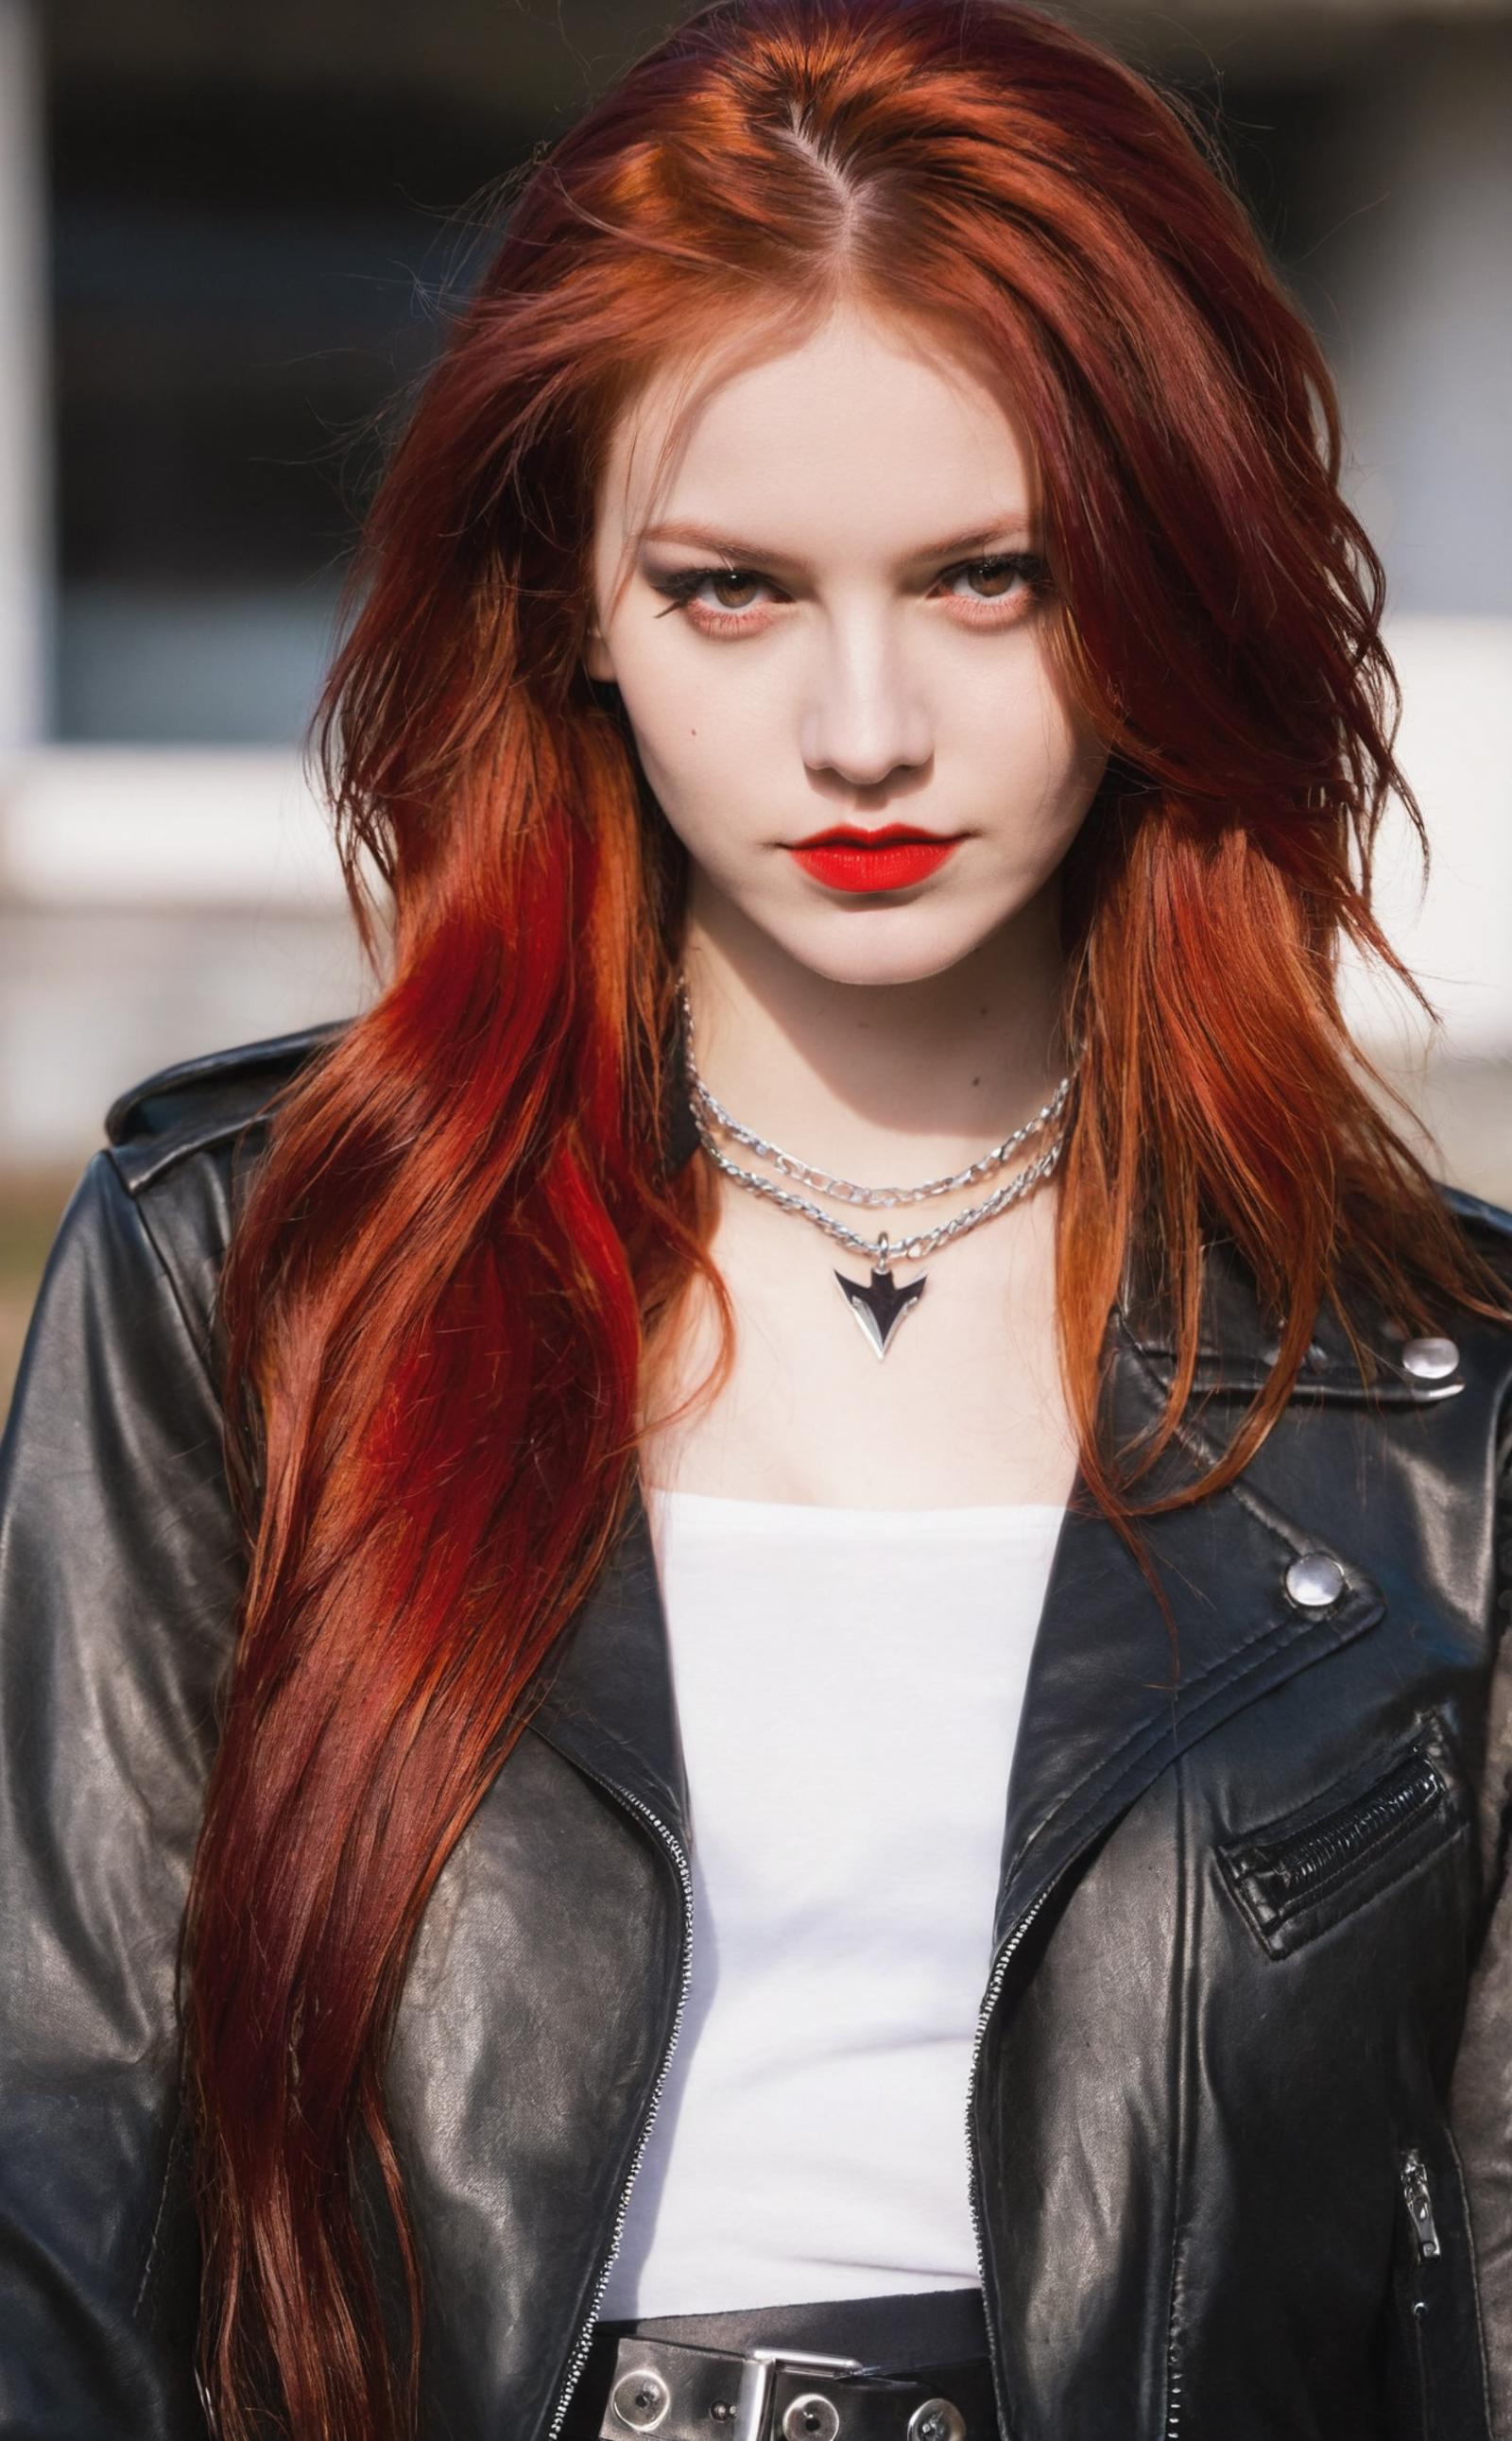 A red-haired woman with a leather jacket and a necklace.